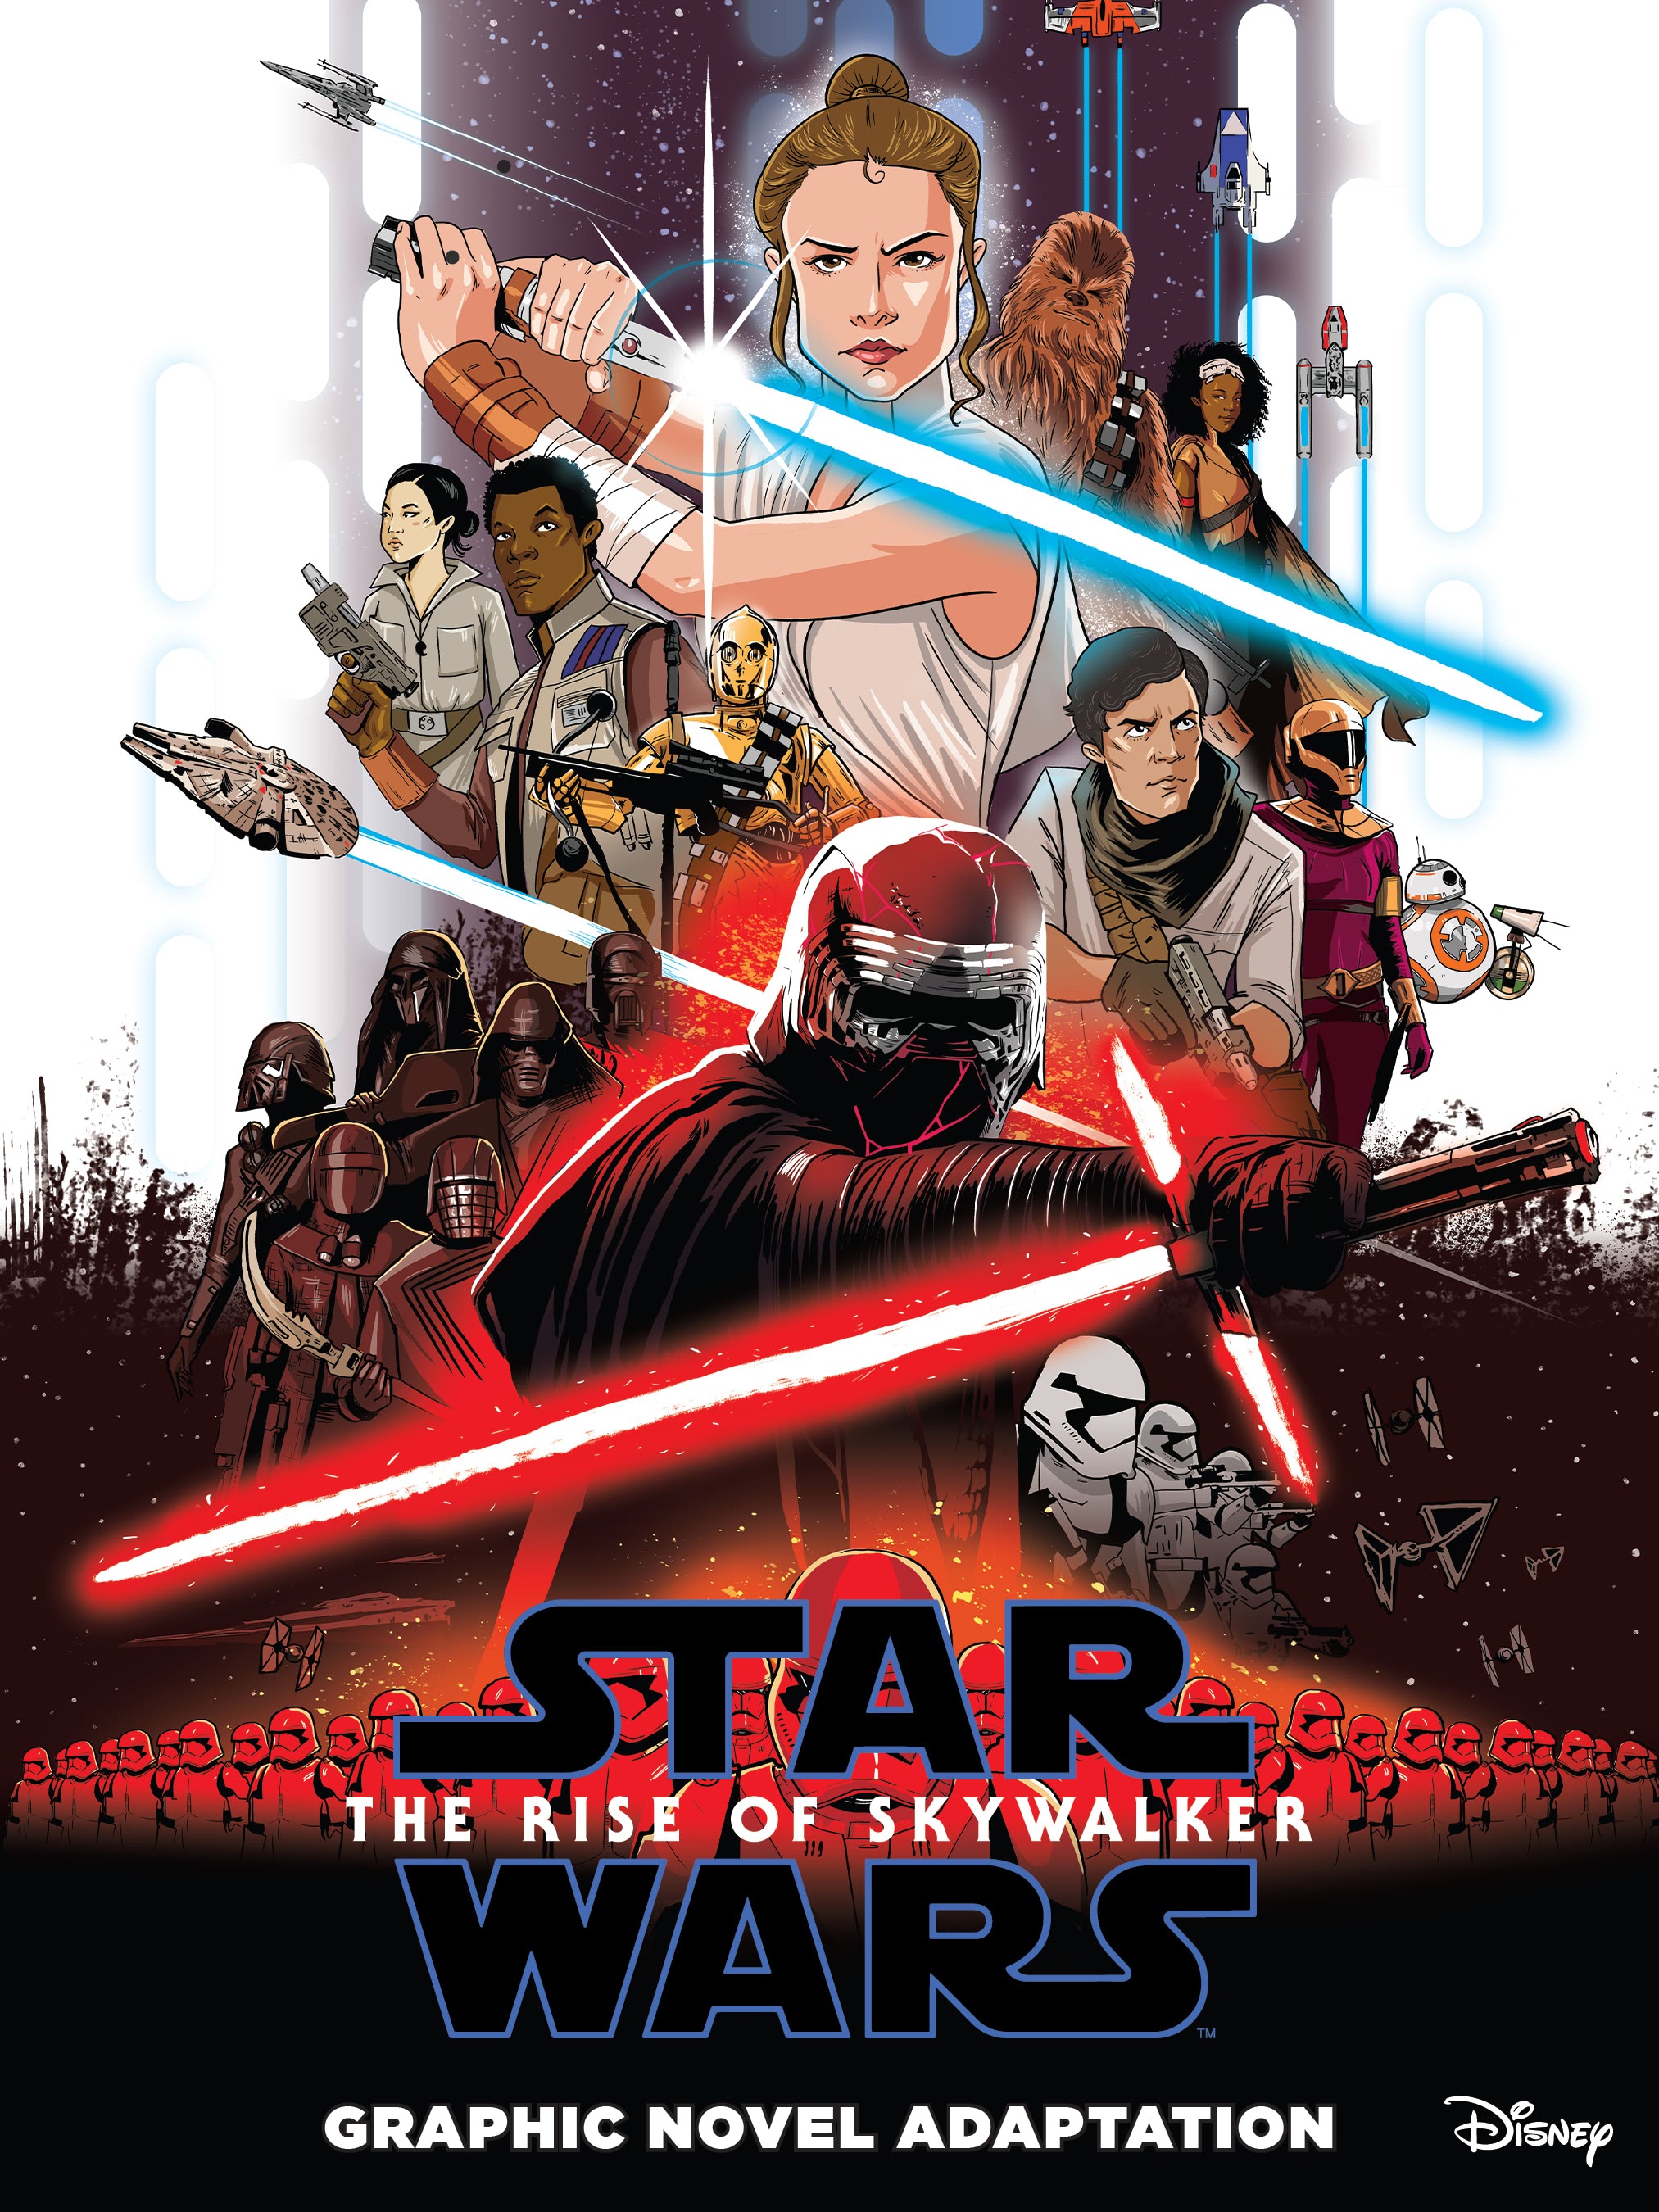 Read online Star Wars: The Rise of Skywalker Graphic Novel Adaptation comic -  Issue # TPB - 1